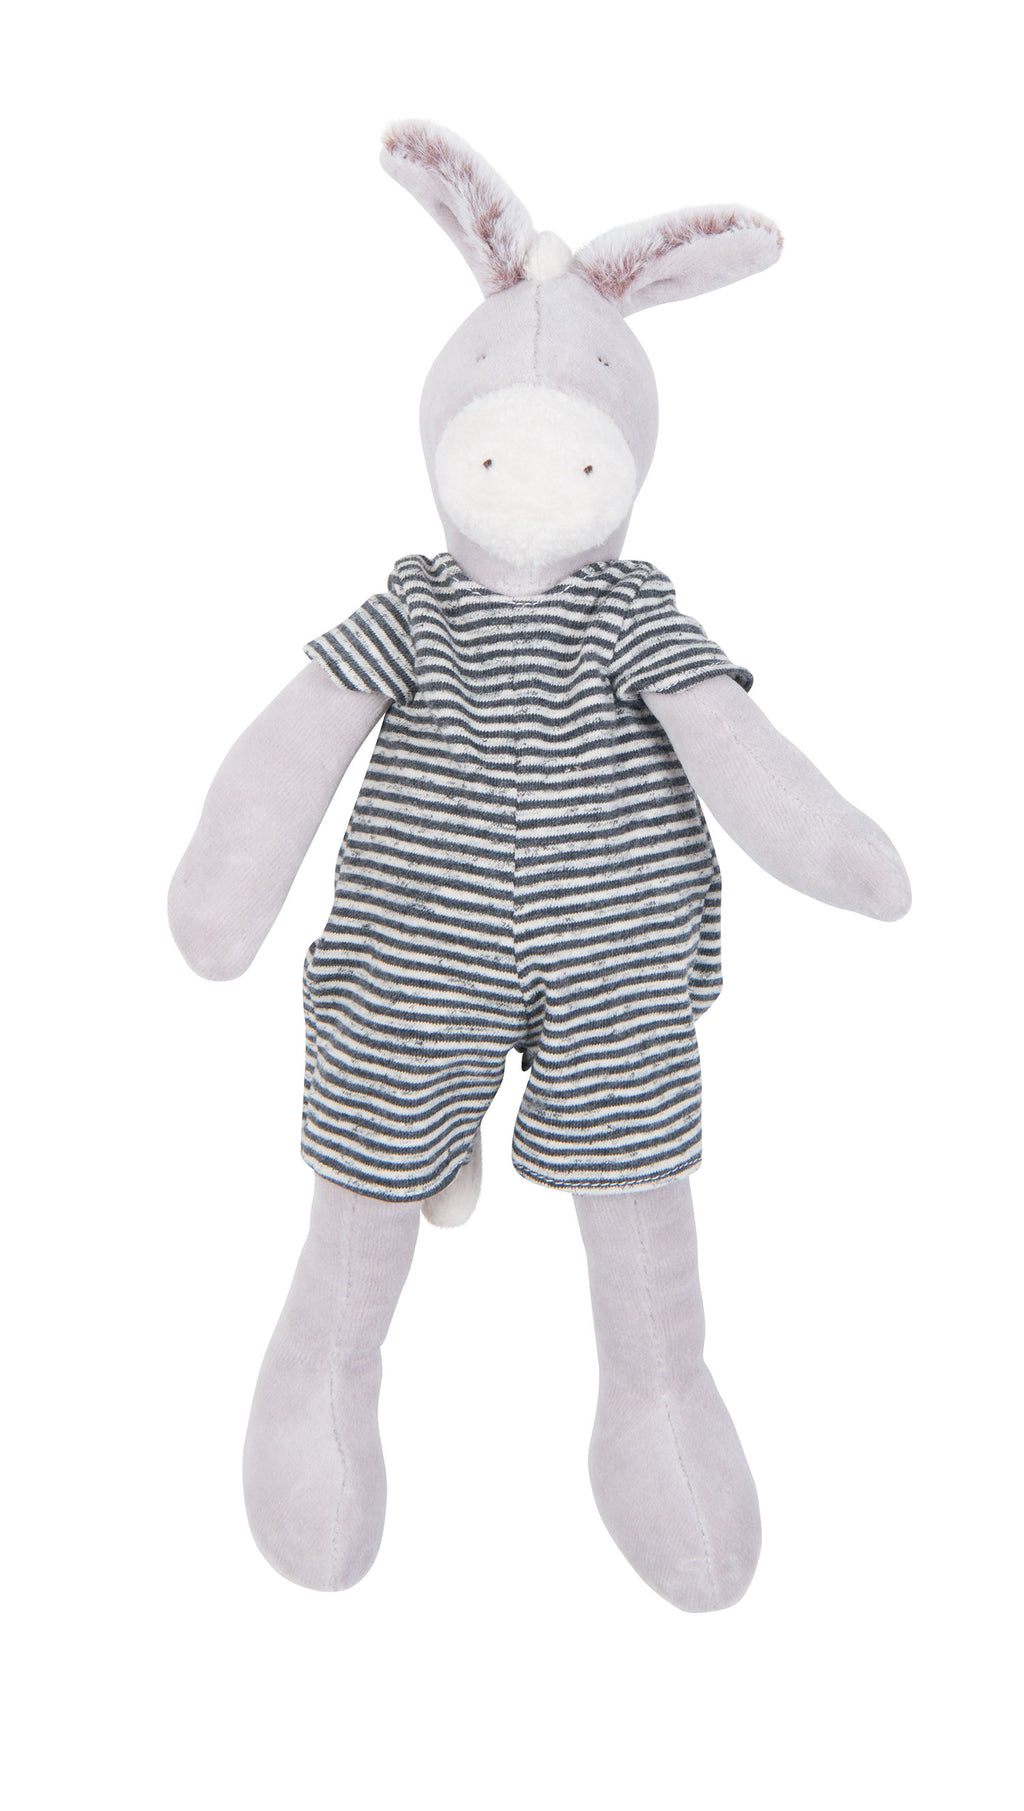 Barnabé the Donkey, with his soft little ears and all dressed in stripes, is just waiting to enjoy gentle cuddles with baby! Suitable from newborn, but still enjoyed many years later. 